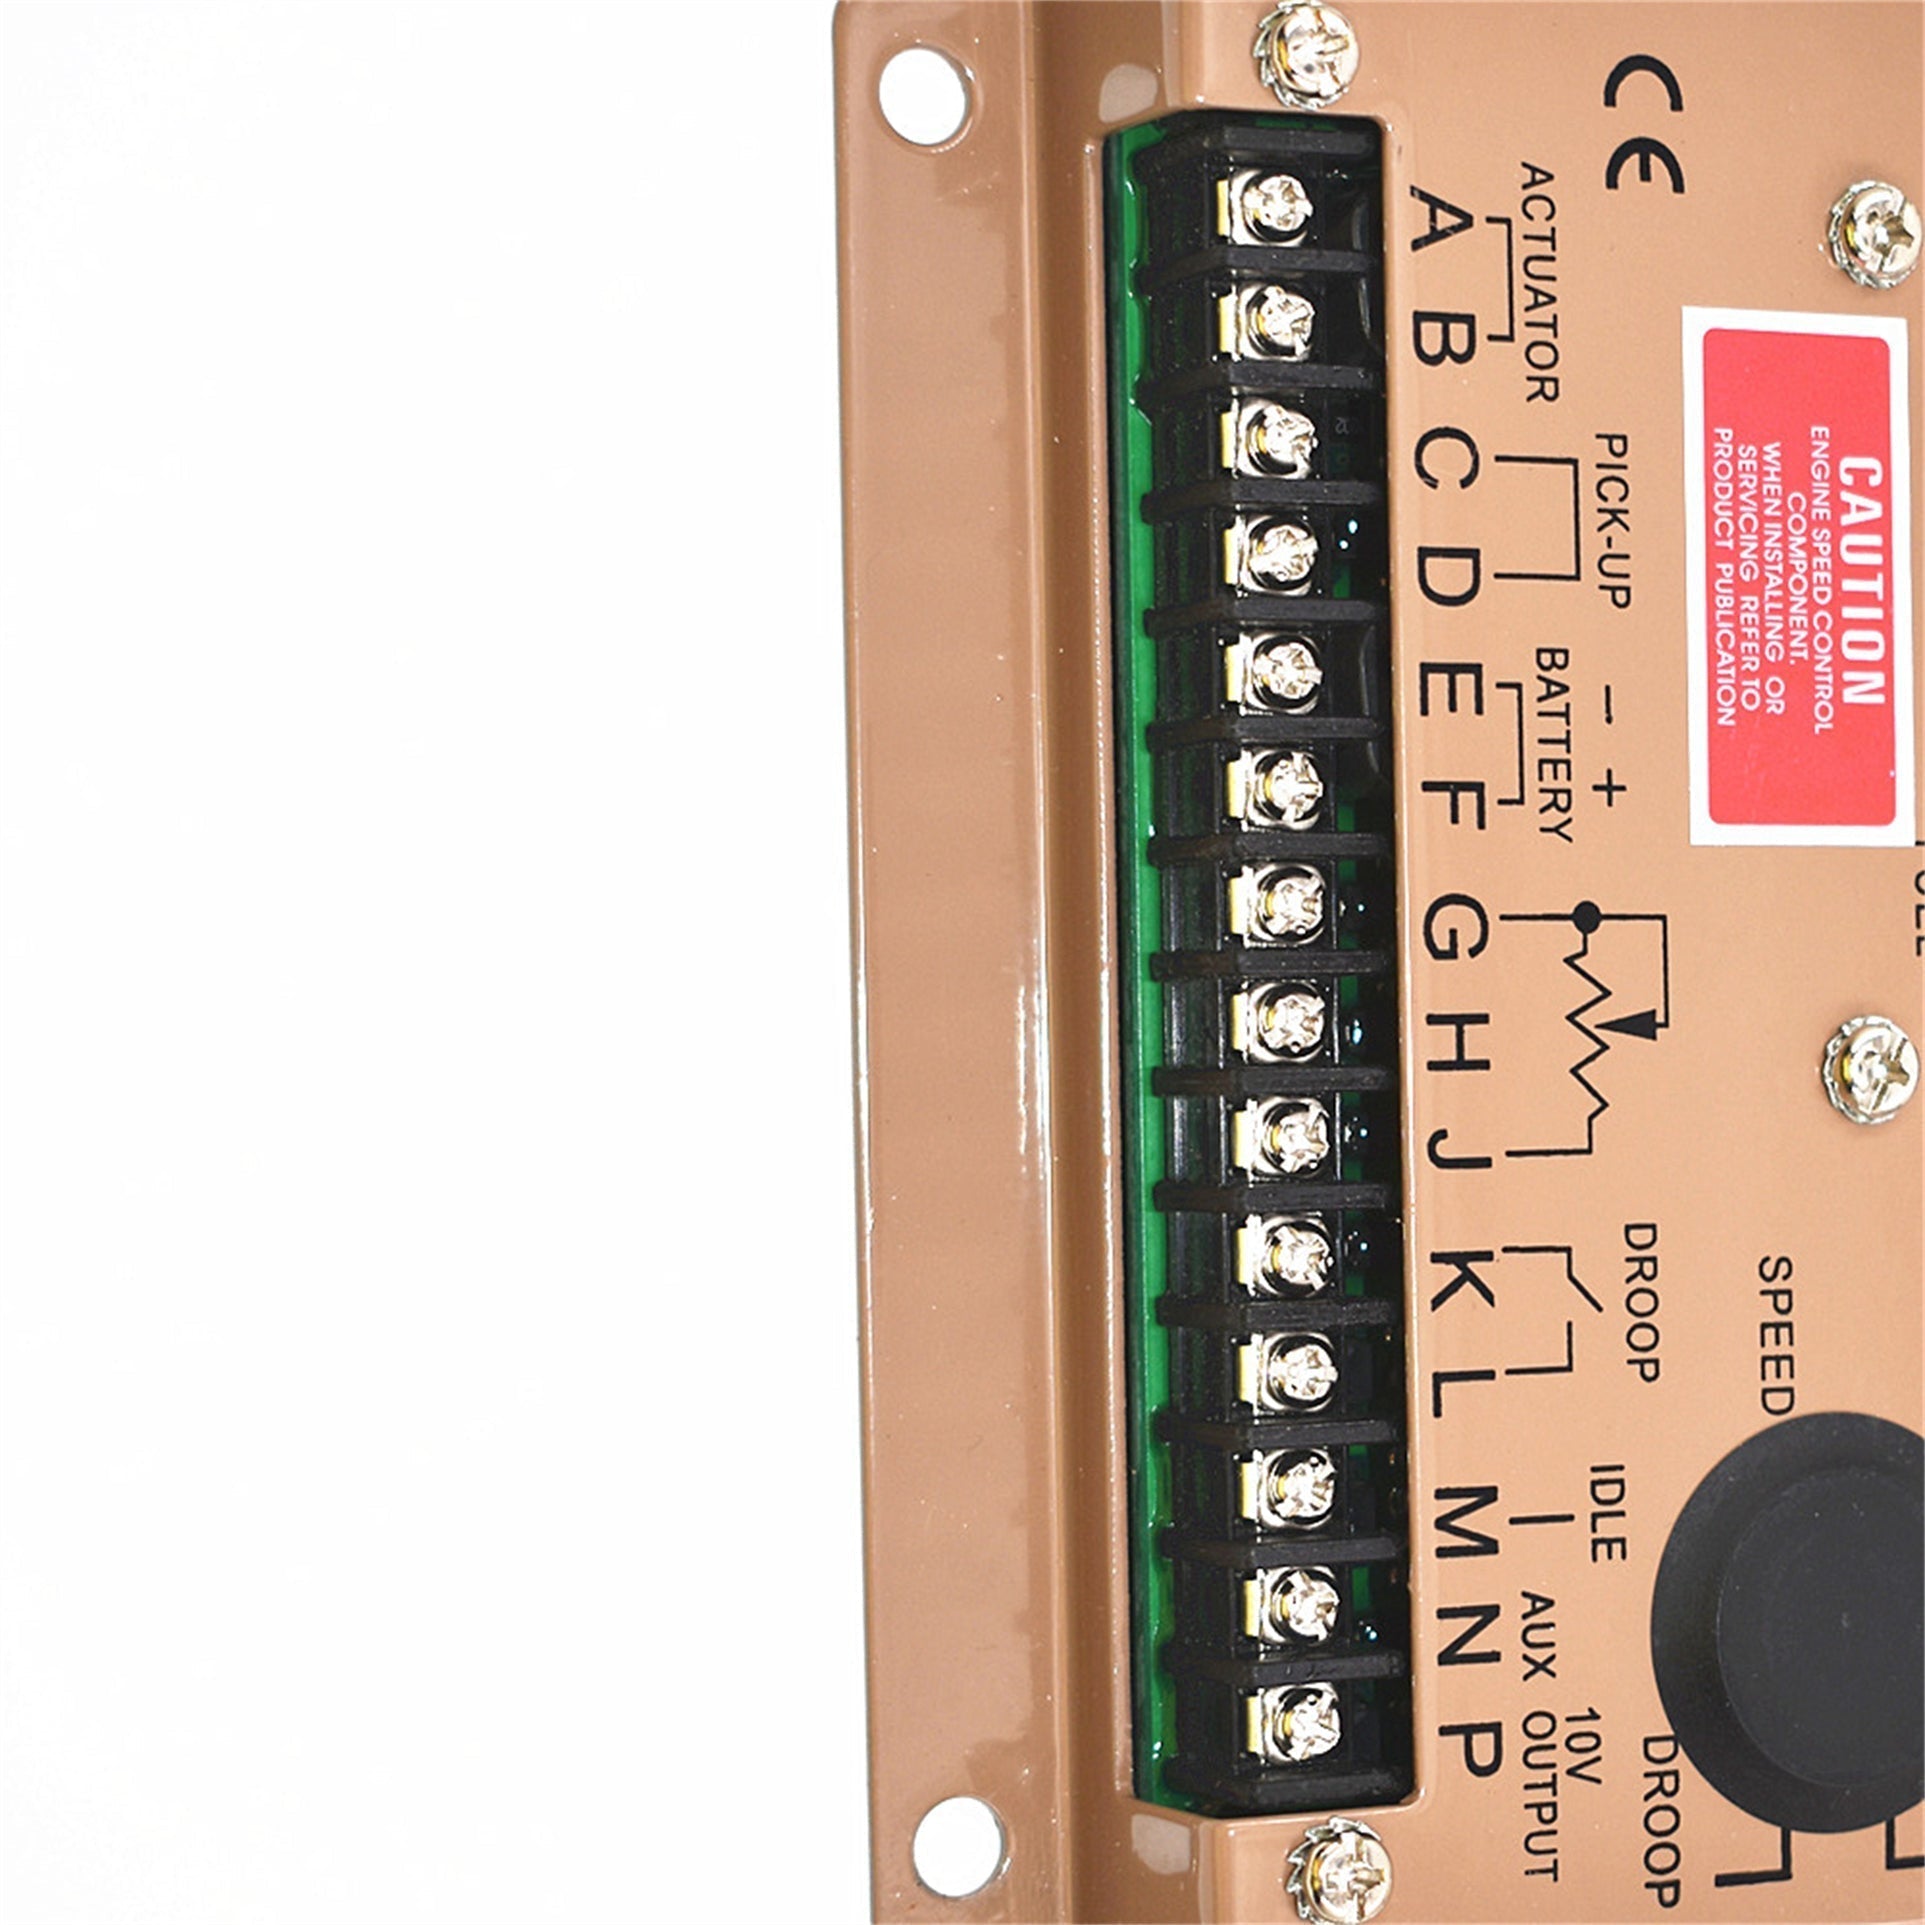 findmall ESD5500E Electronic Engine Speed Controller Governor Generator Genset Parts FINDMALLPARTS